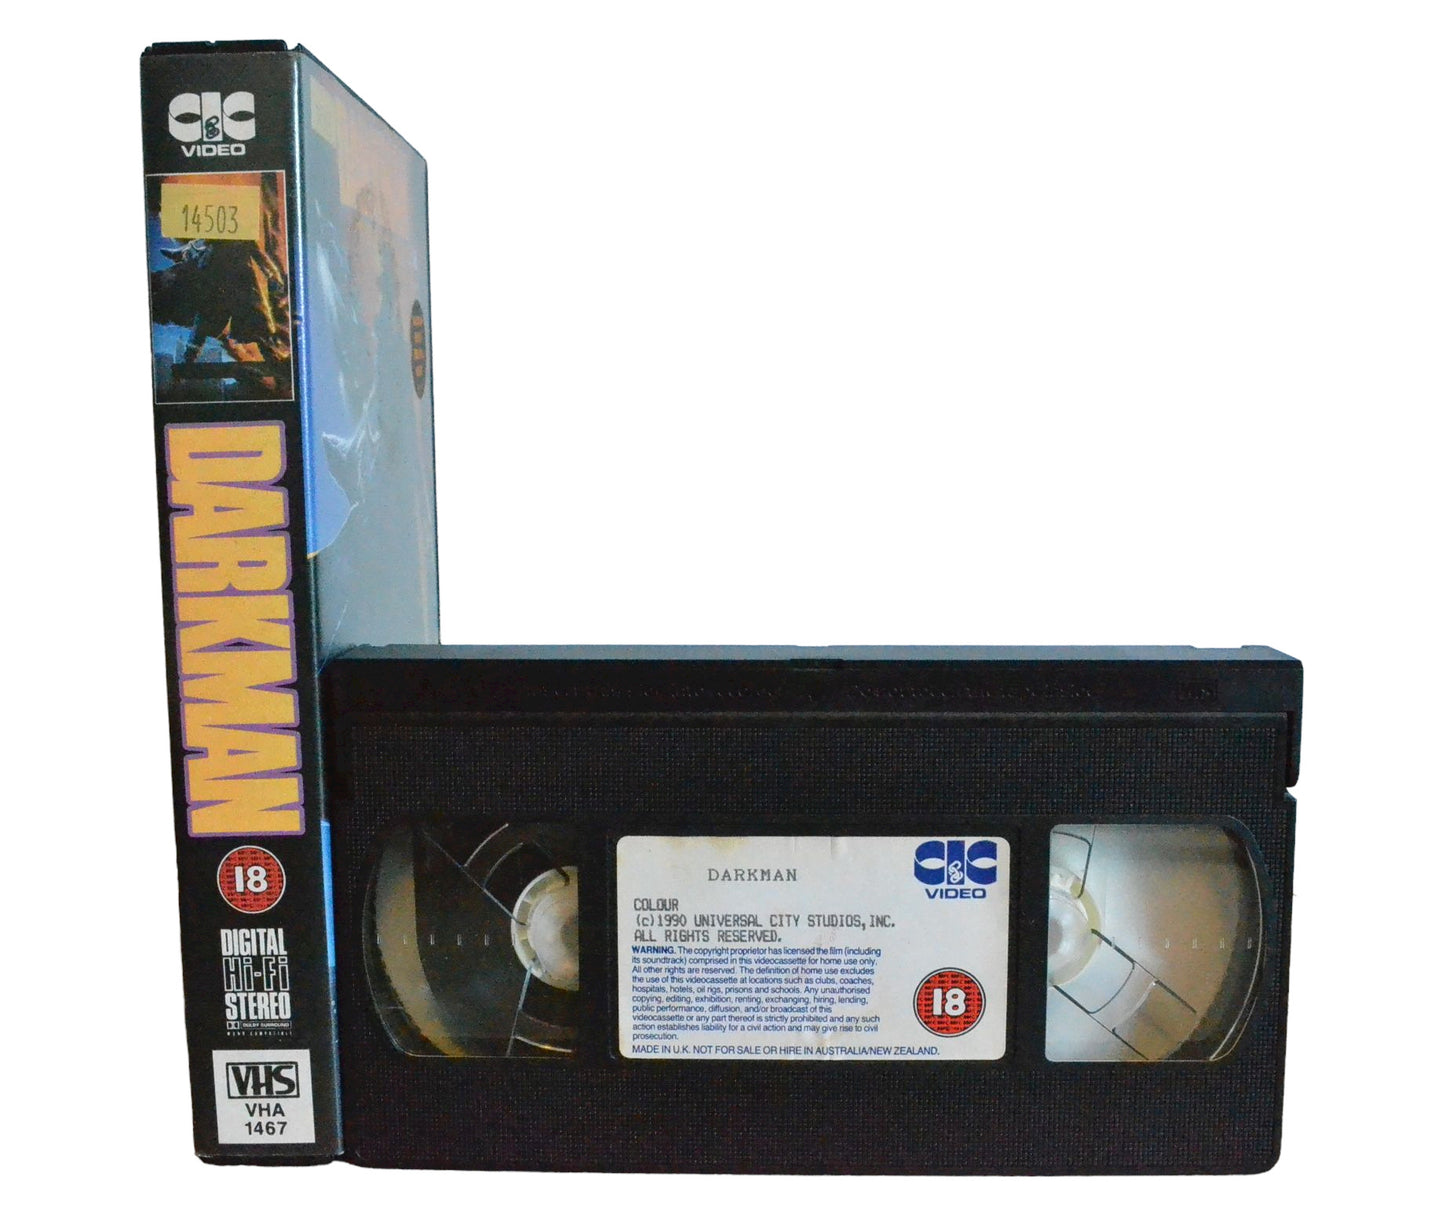 Darkman (They Destroyed Everything He Had, Everythin He Was.) - Liam Neeson - CIC VIdeo - Large Box - PAL - VHS-